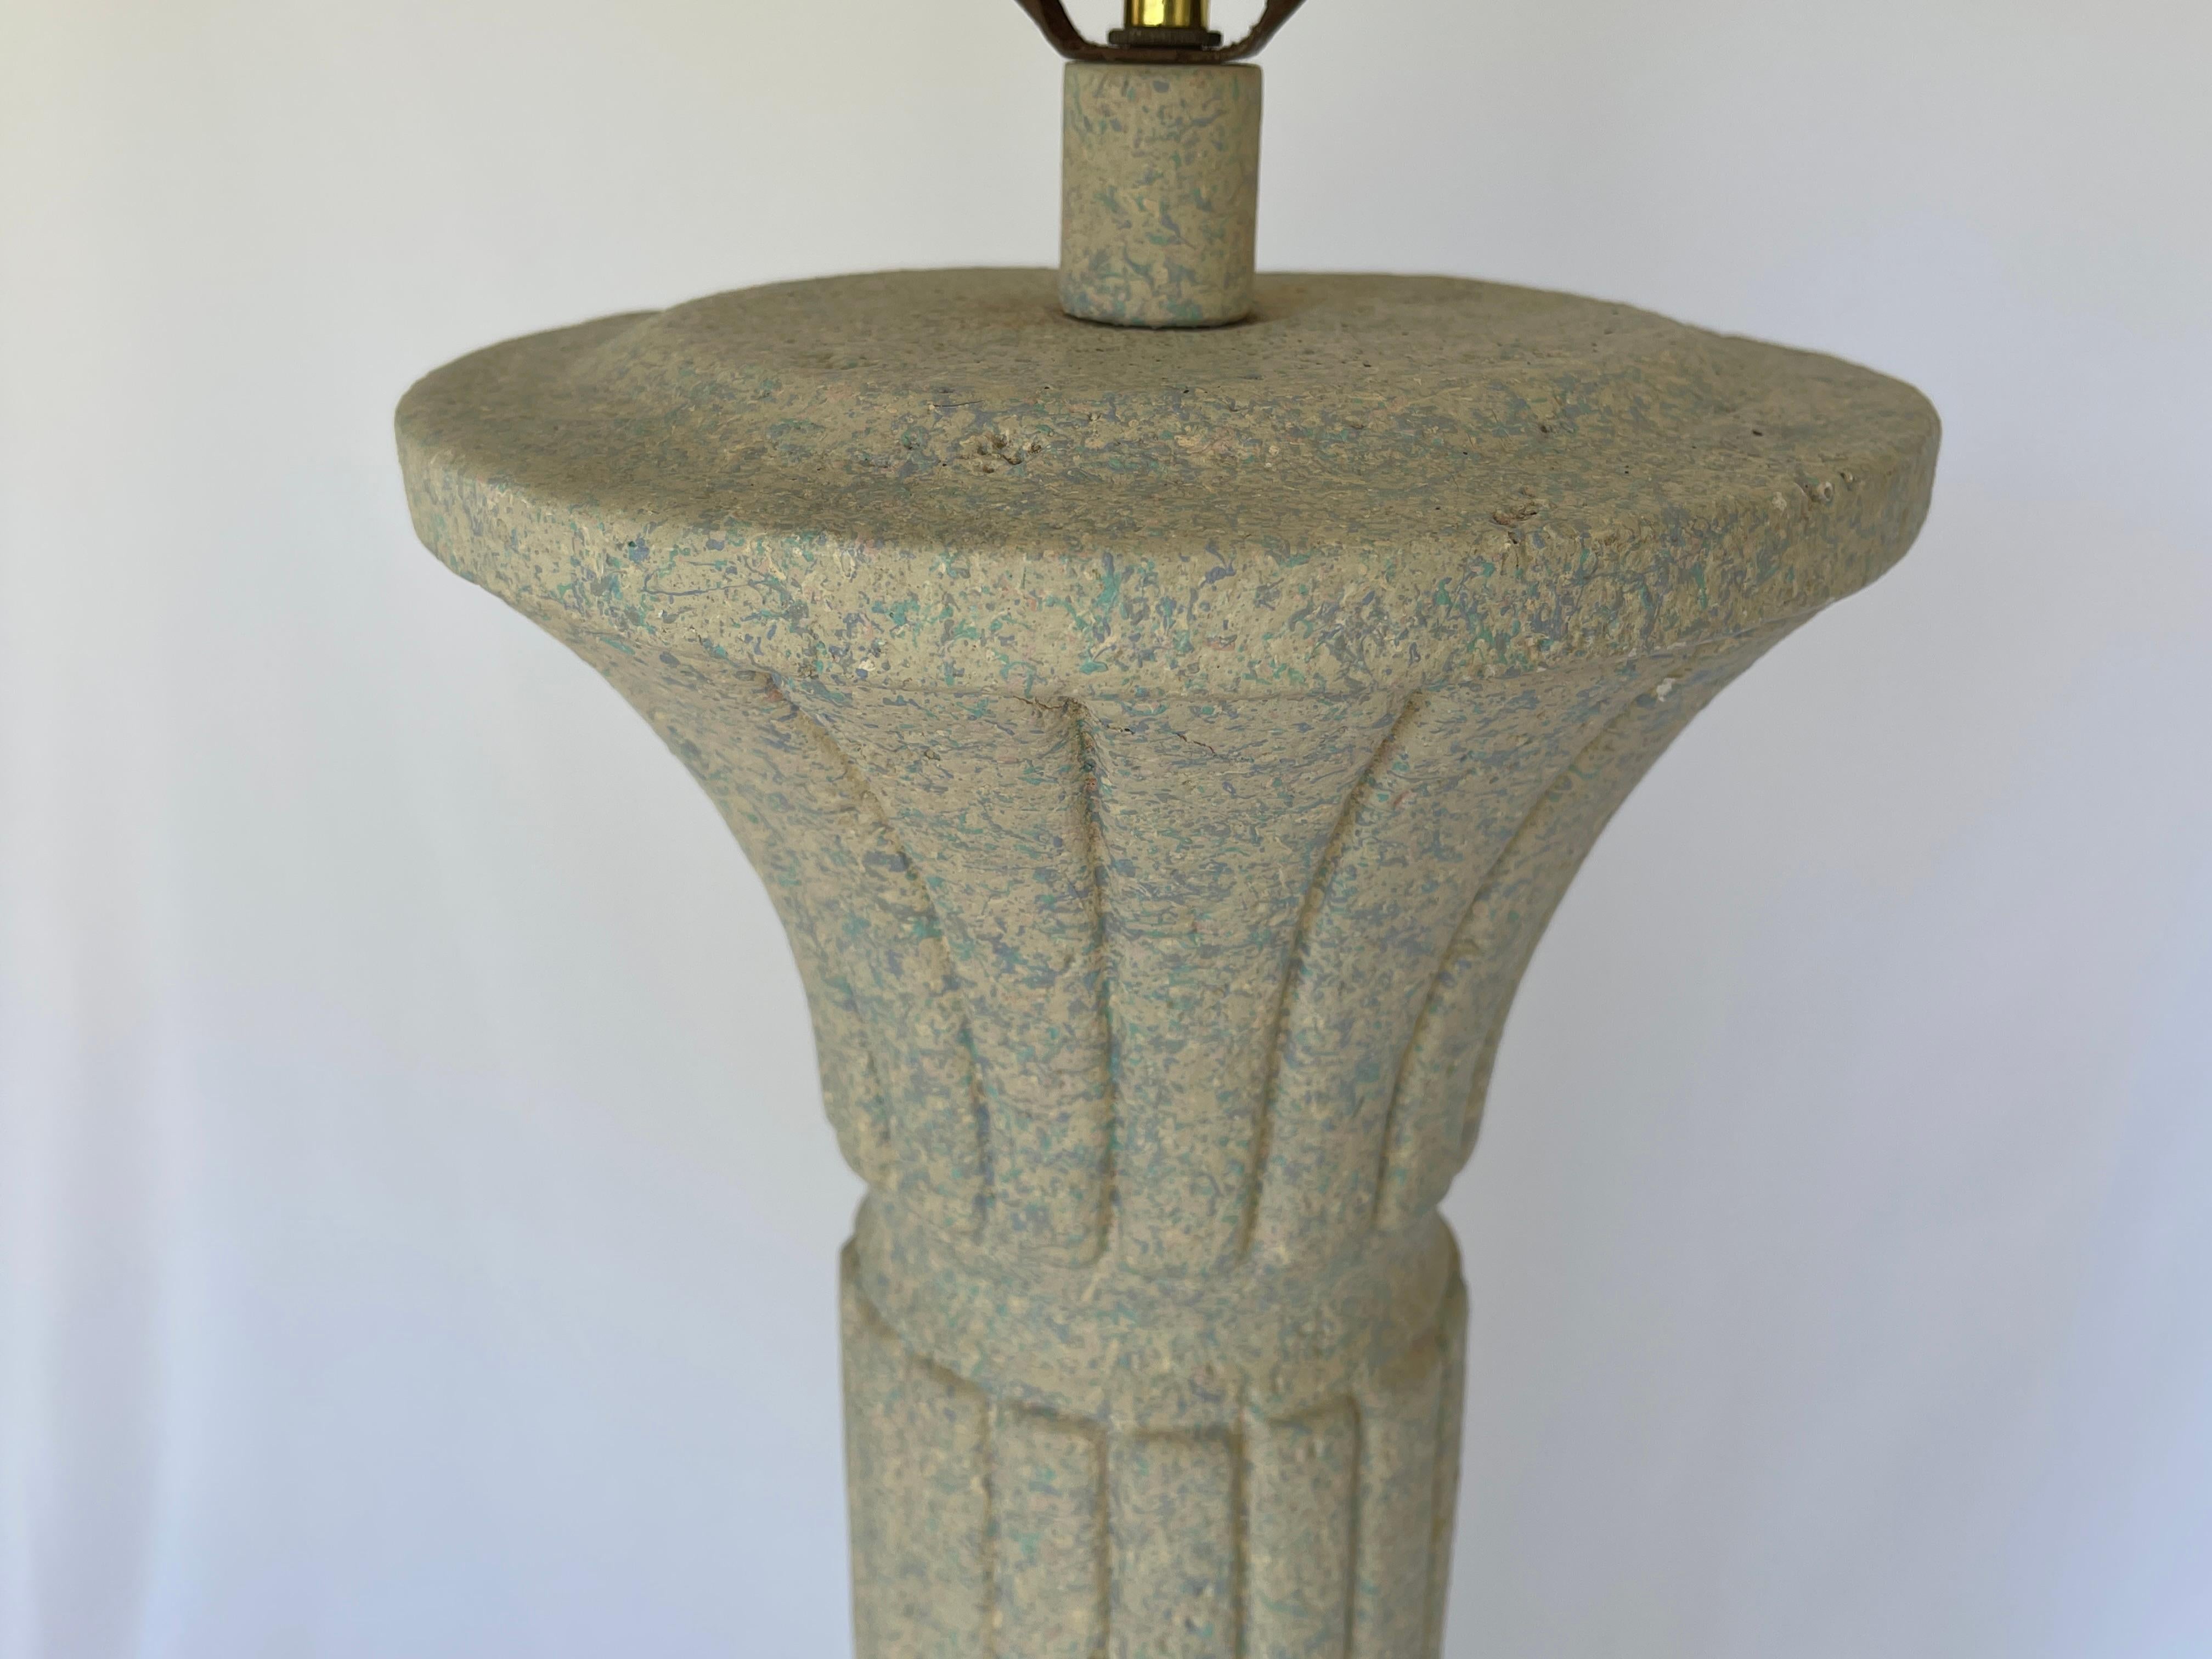 Classic Post Modern plaster circular column floor lamp with matching plaster sphere finial. Dated under side, Oct 1, 1993